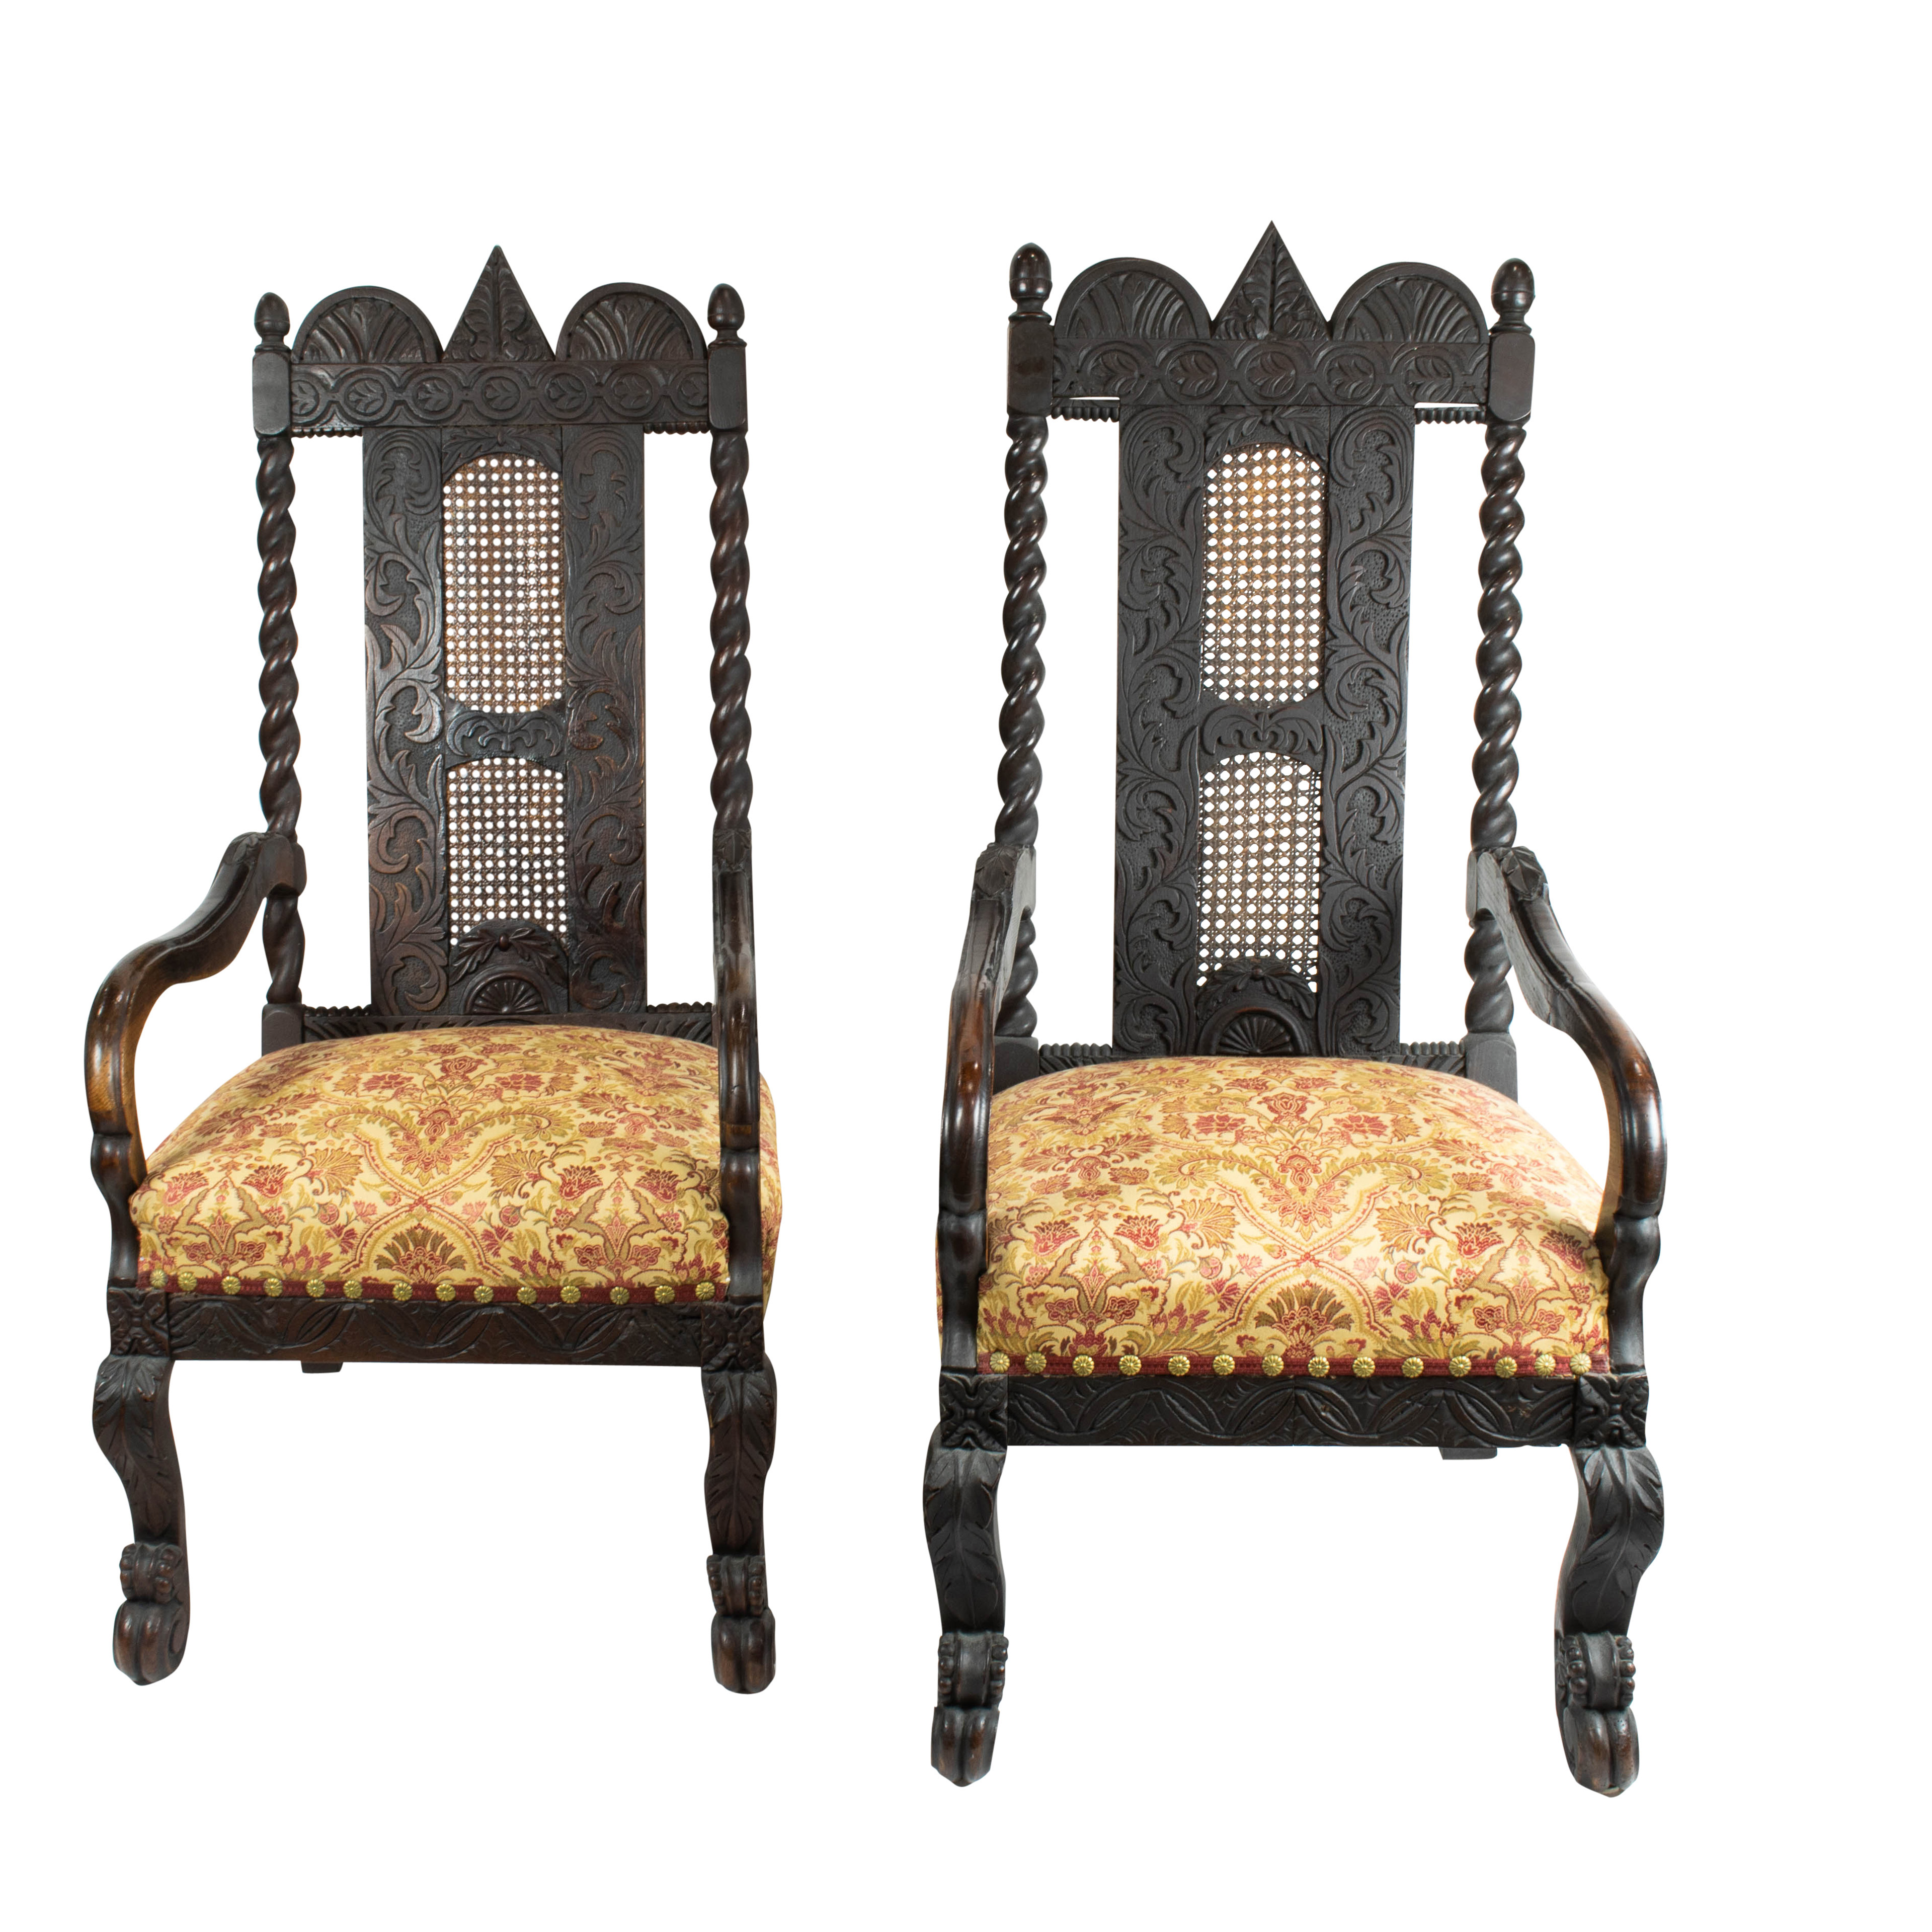 A PAIR OF JACOBEAN STYLE HALL CHAIRS 3a6360